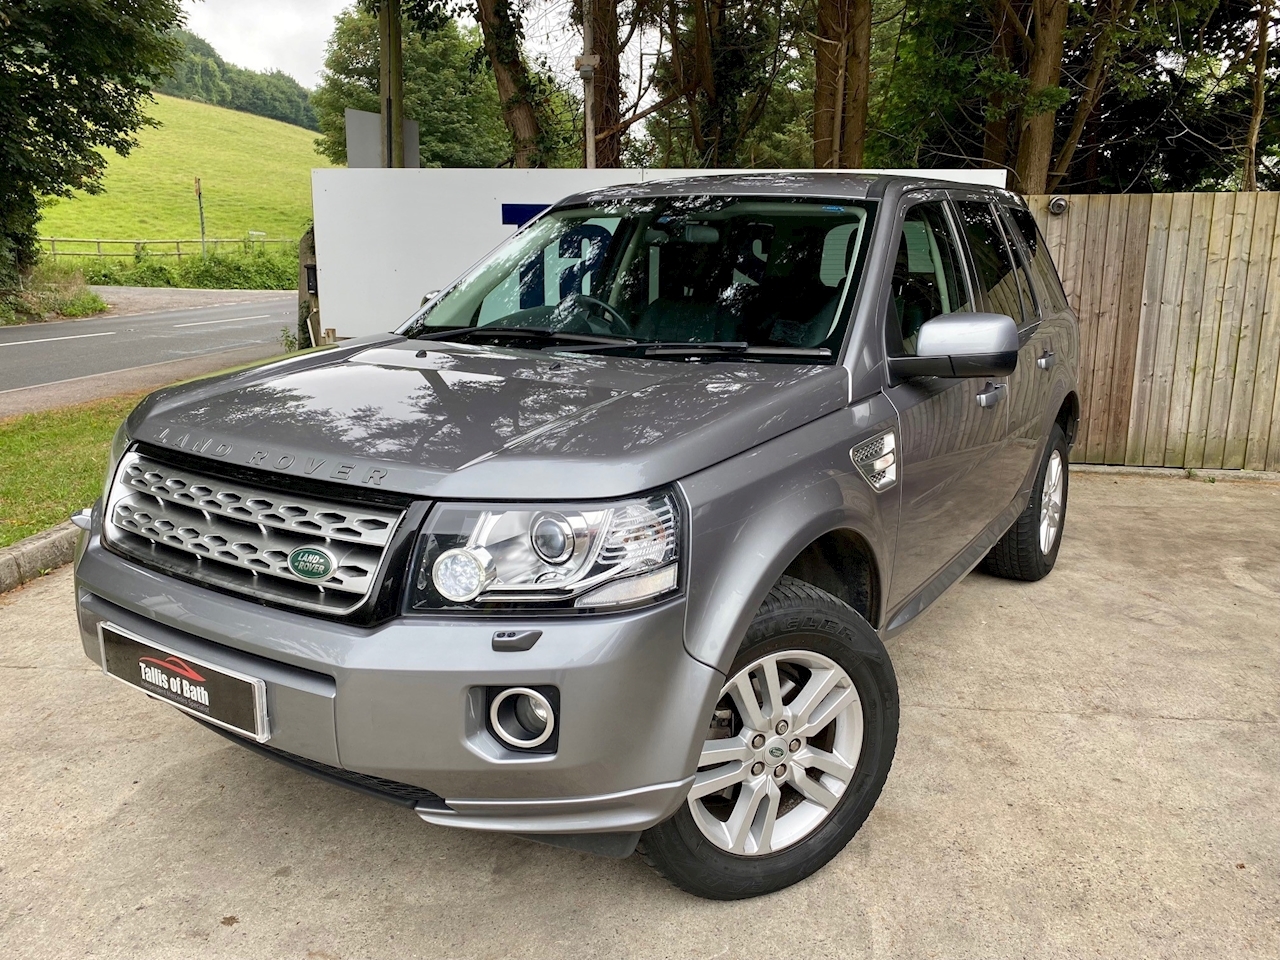 2.2 SD4 XS SUV 5dr Diesel Automatic 4WD (185 g/km, 190 bhp)